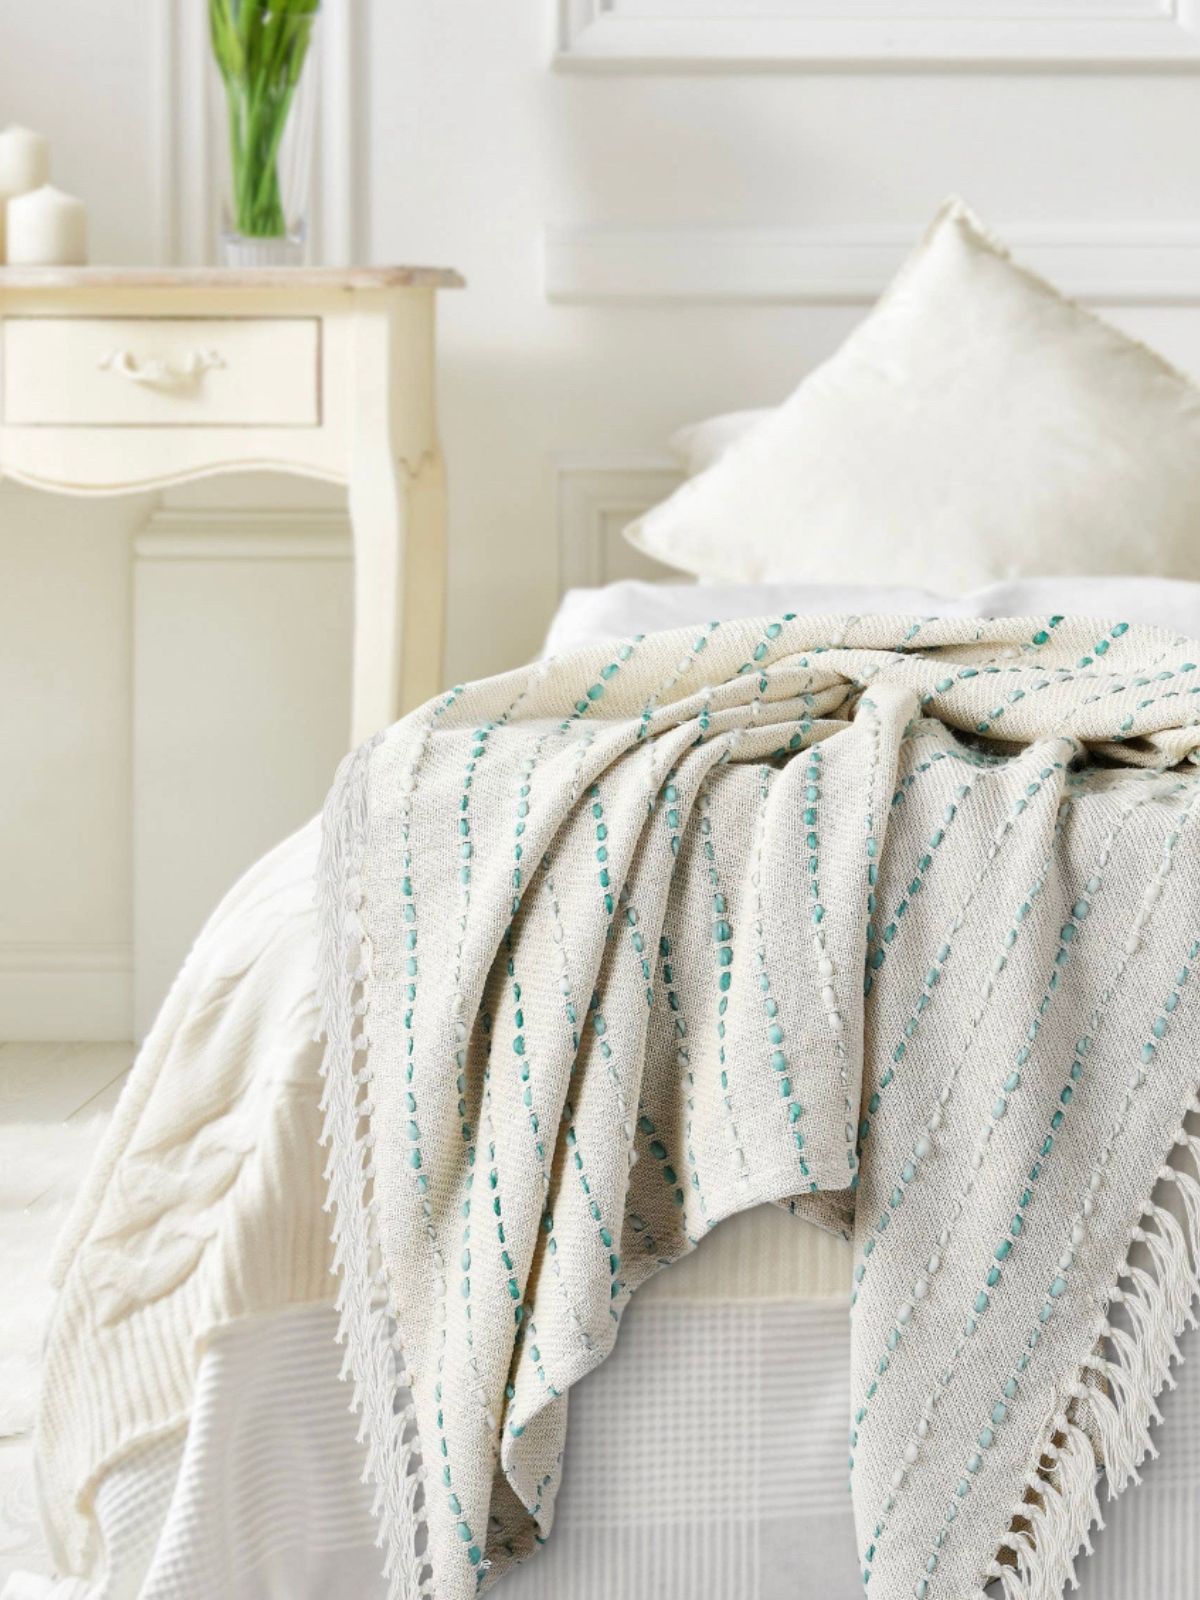 Teal Stripe Woven Cotton Throw Blanket with Fringe.